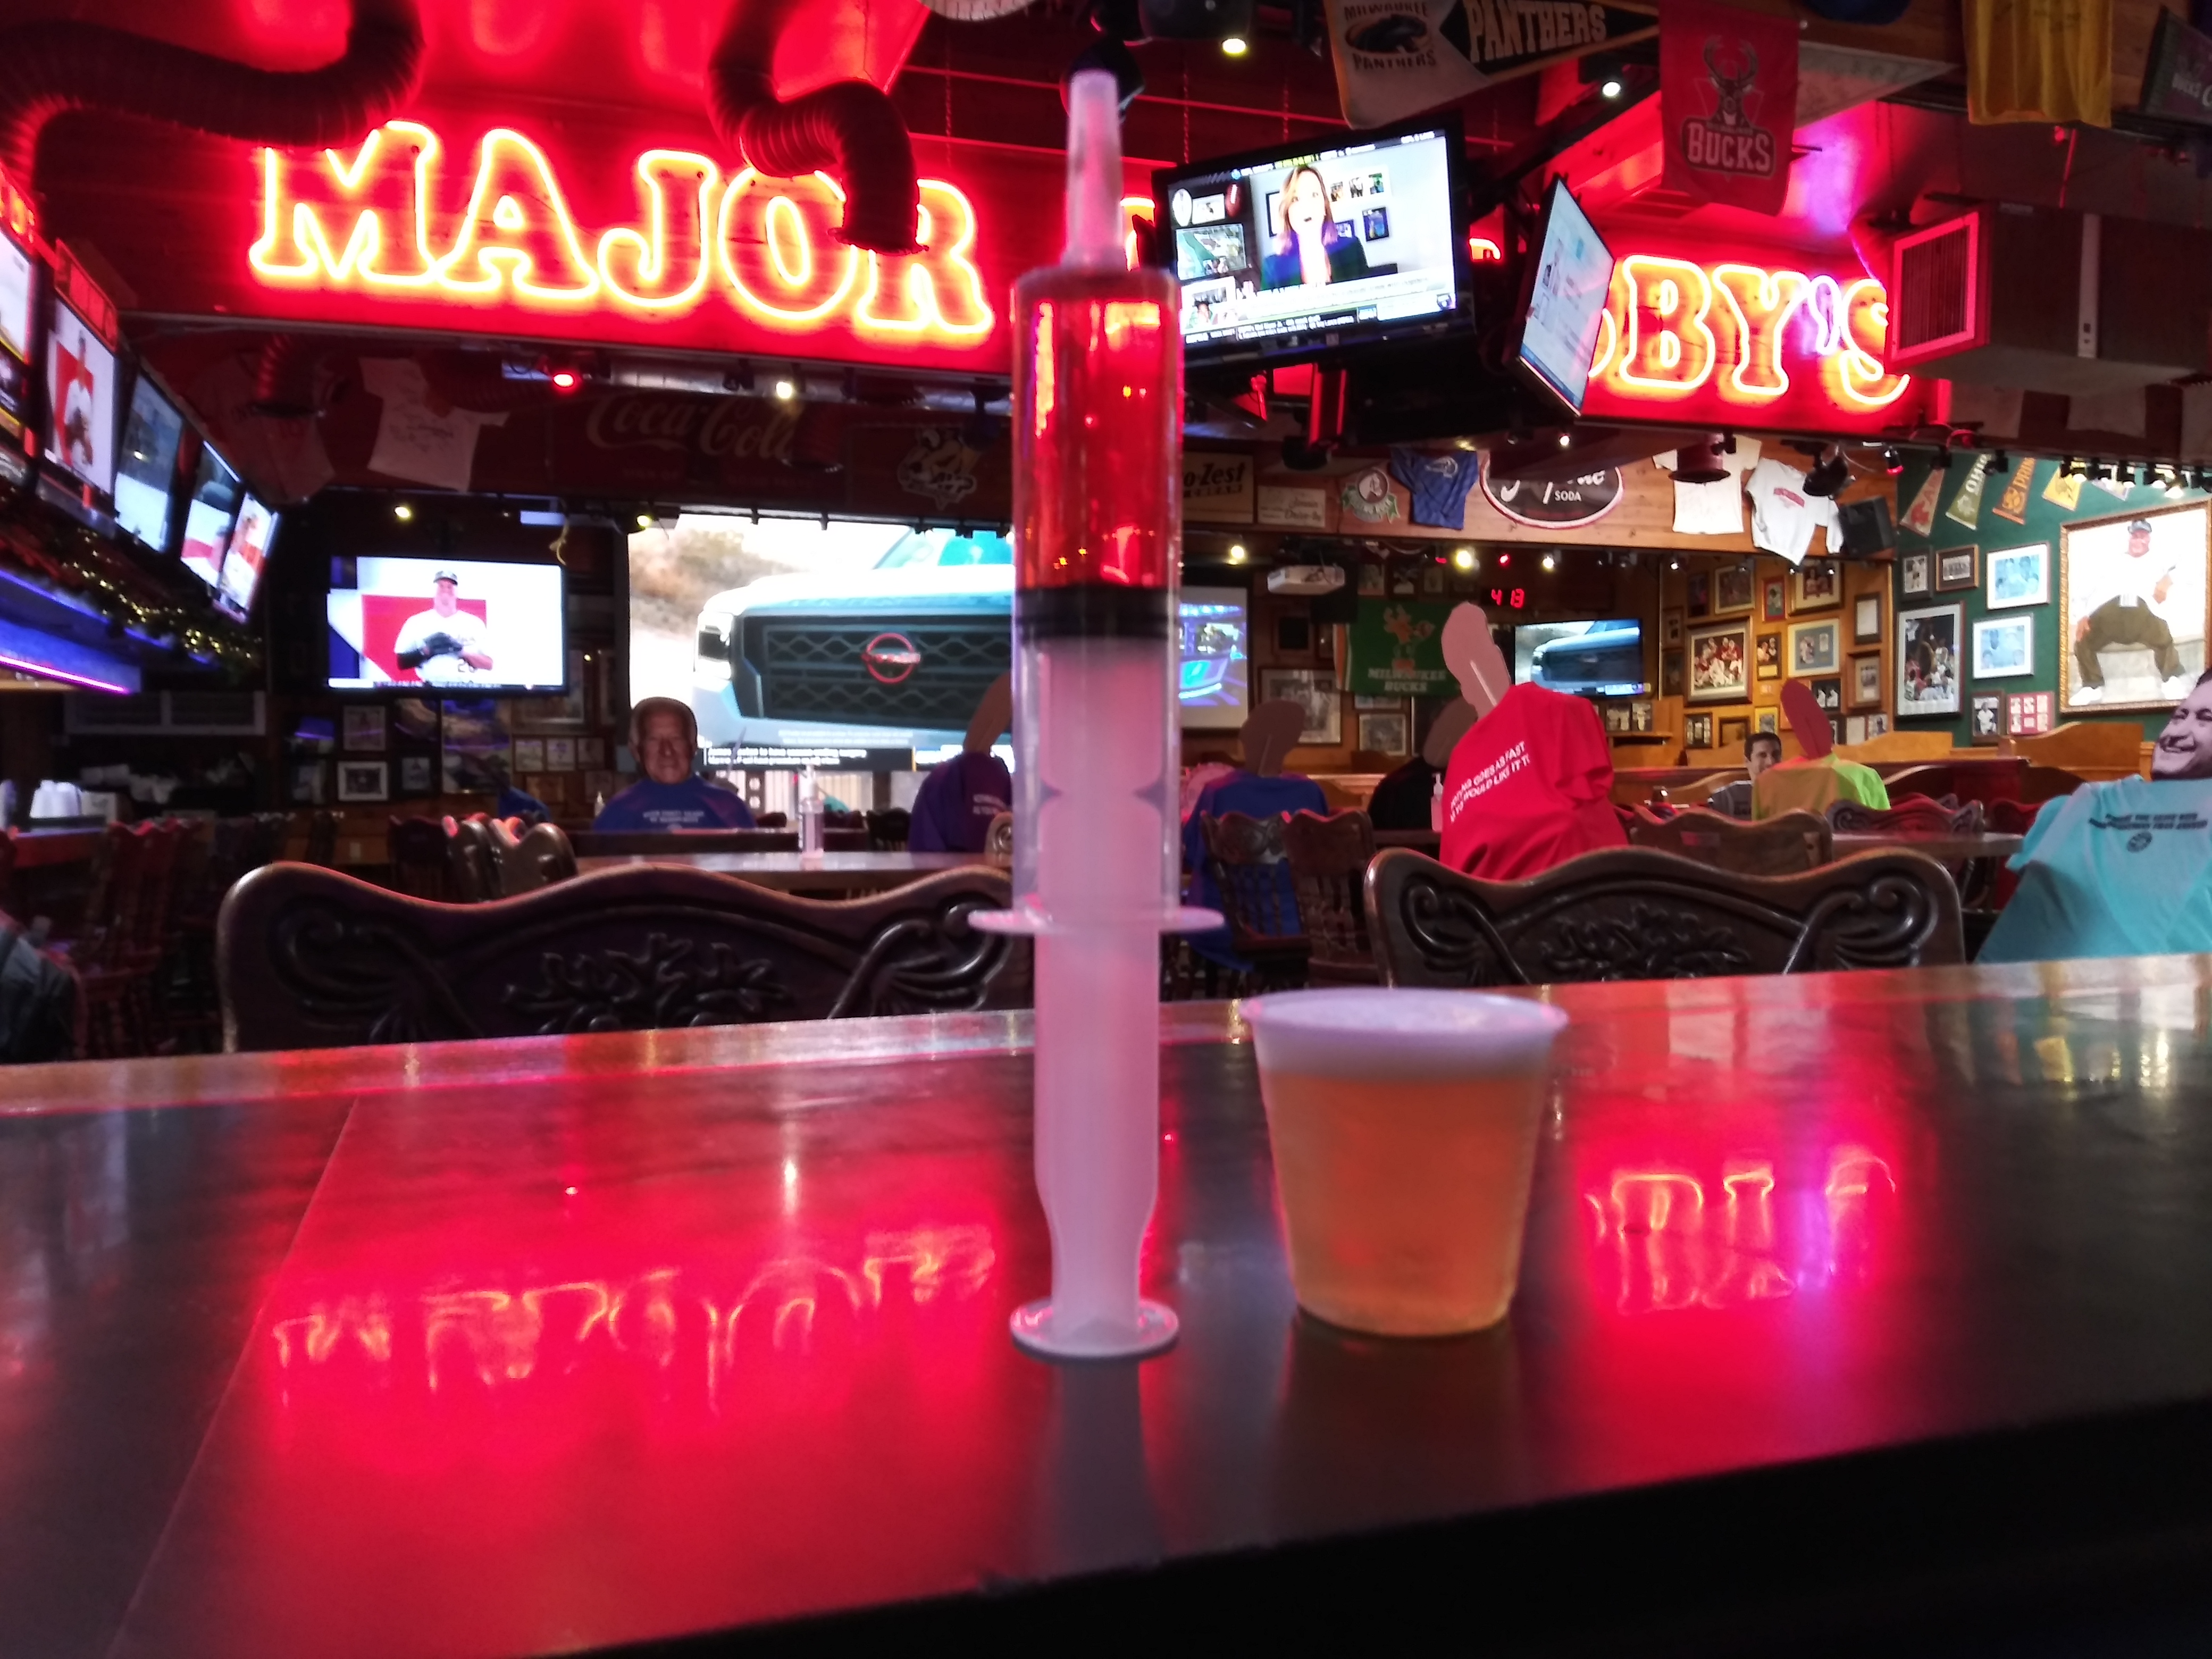 Milwaukee Sports Bar Announces 414 Day Promotion, Continues Free Shots for Vaccination Shots Program